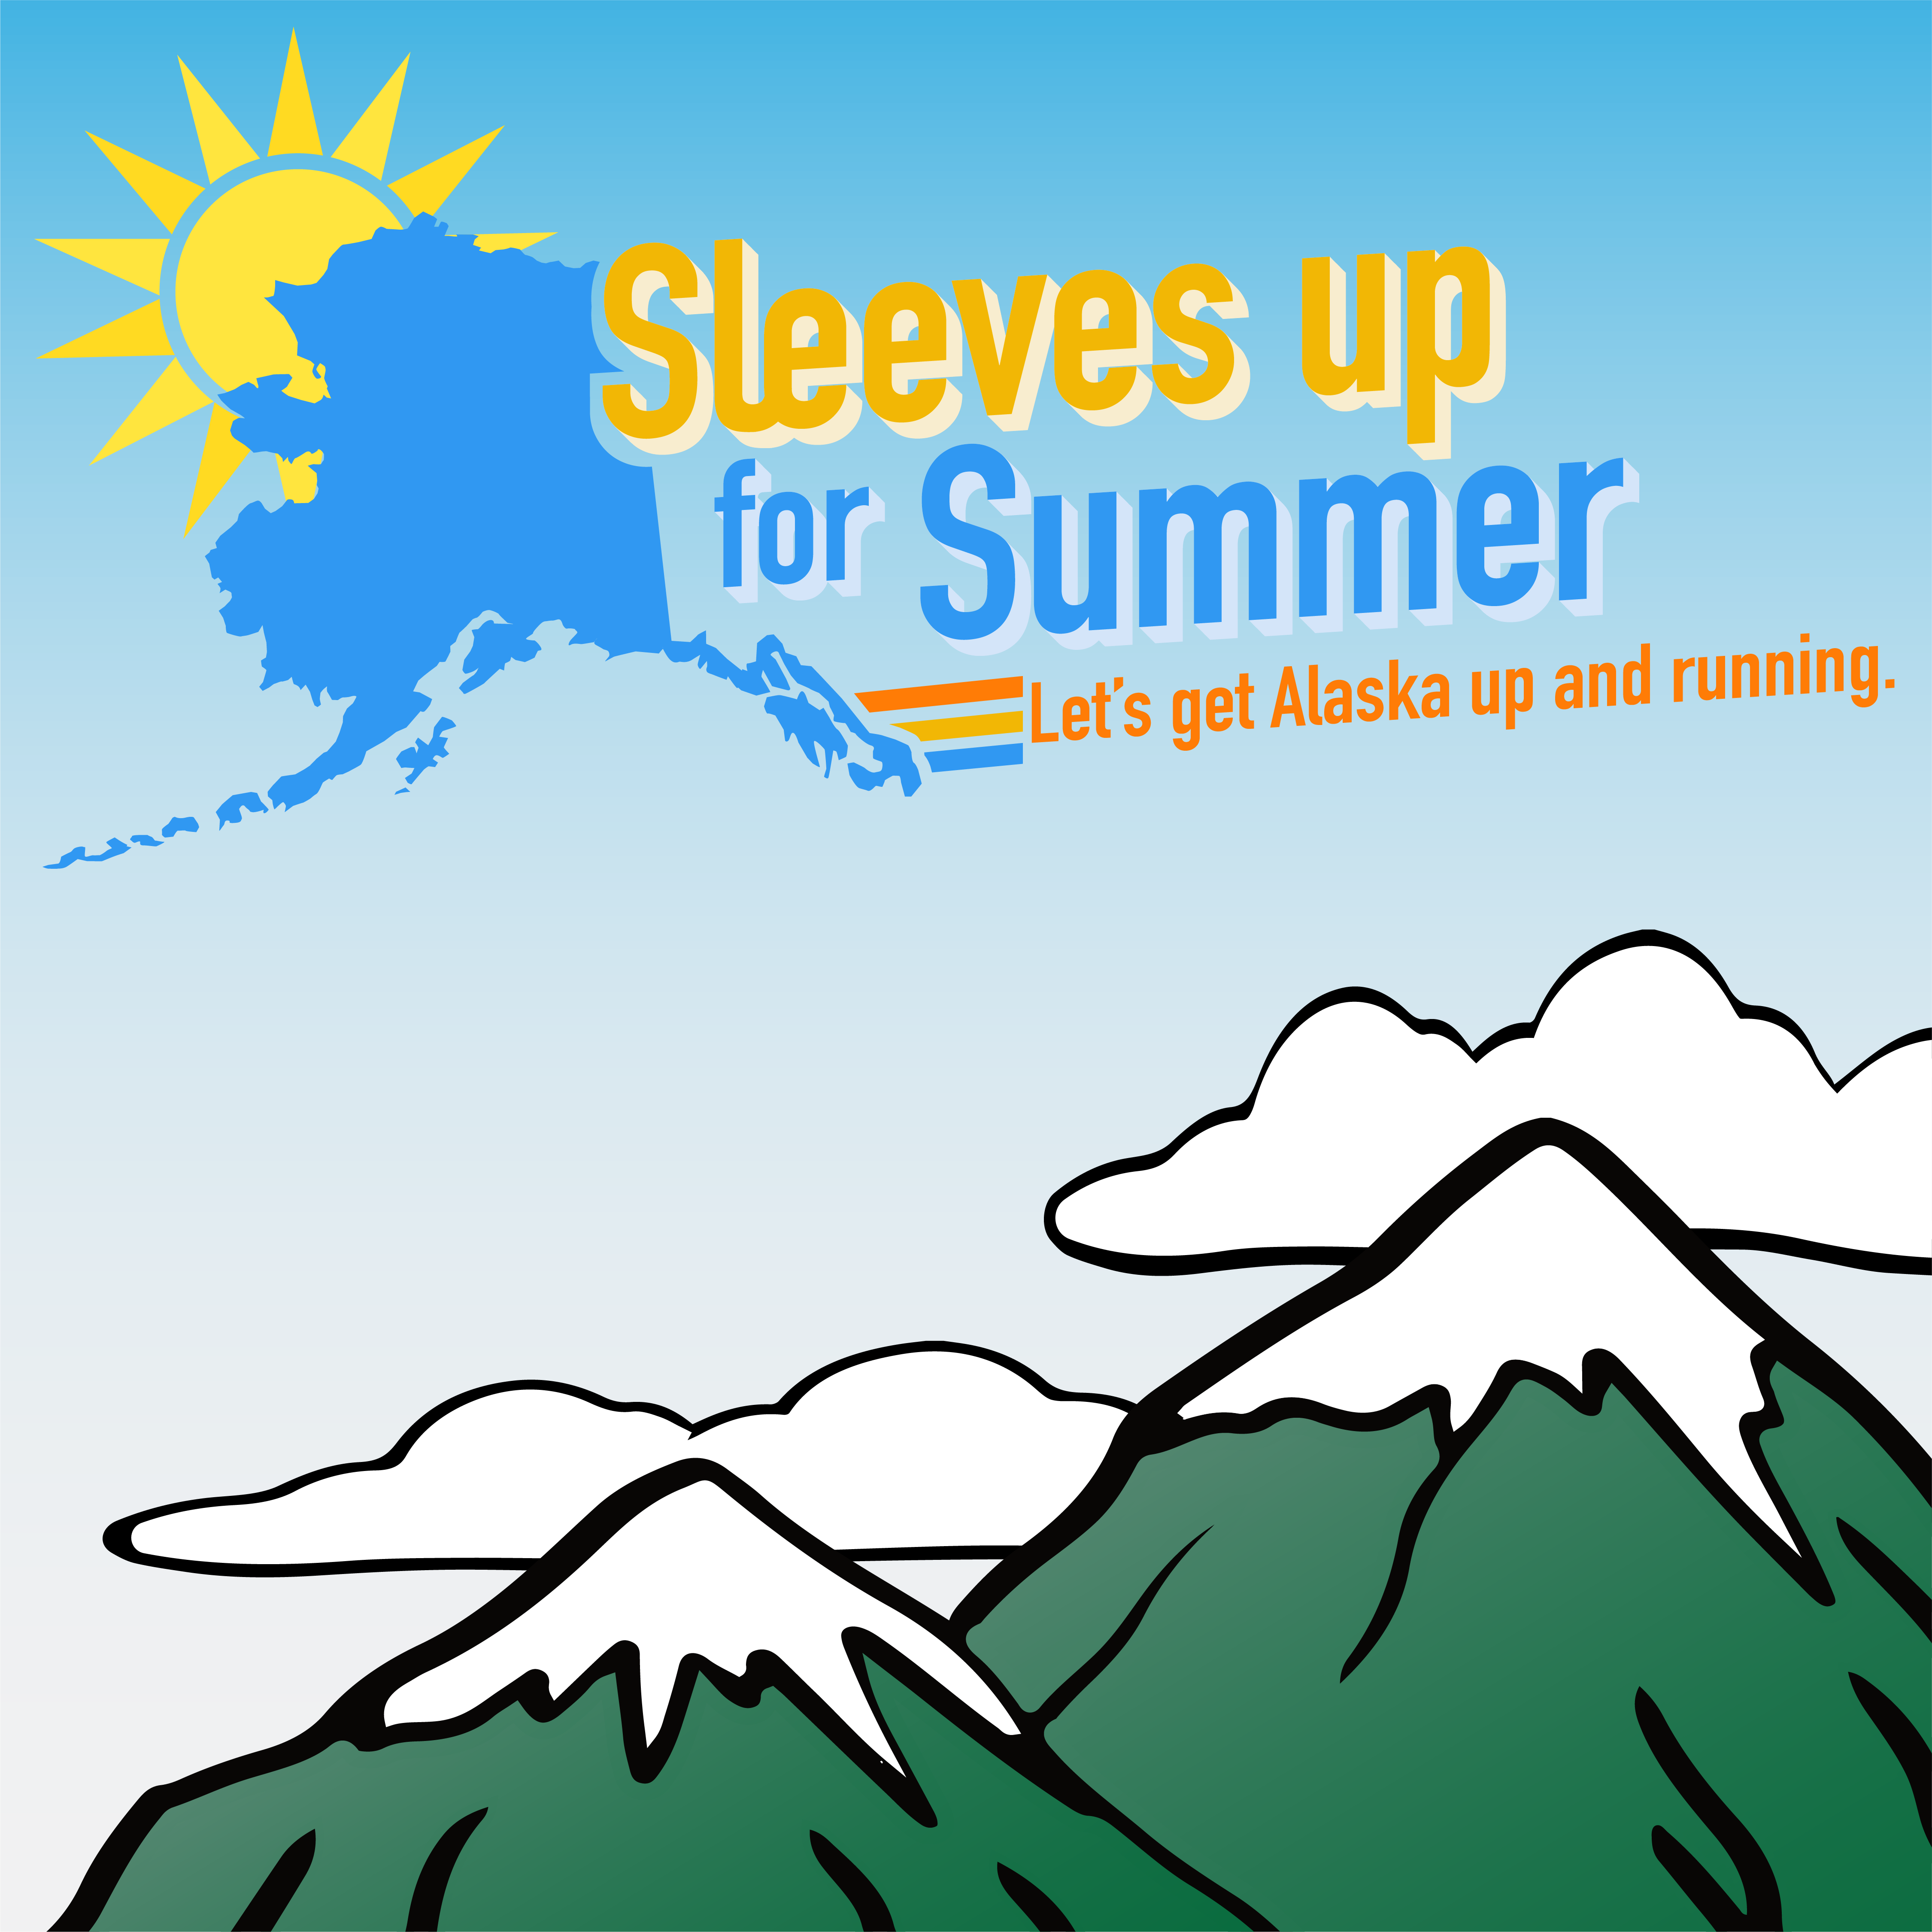 Sleeves up for summer: Mountains - Instagram